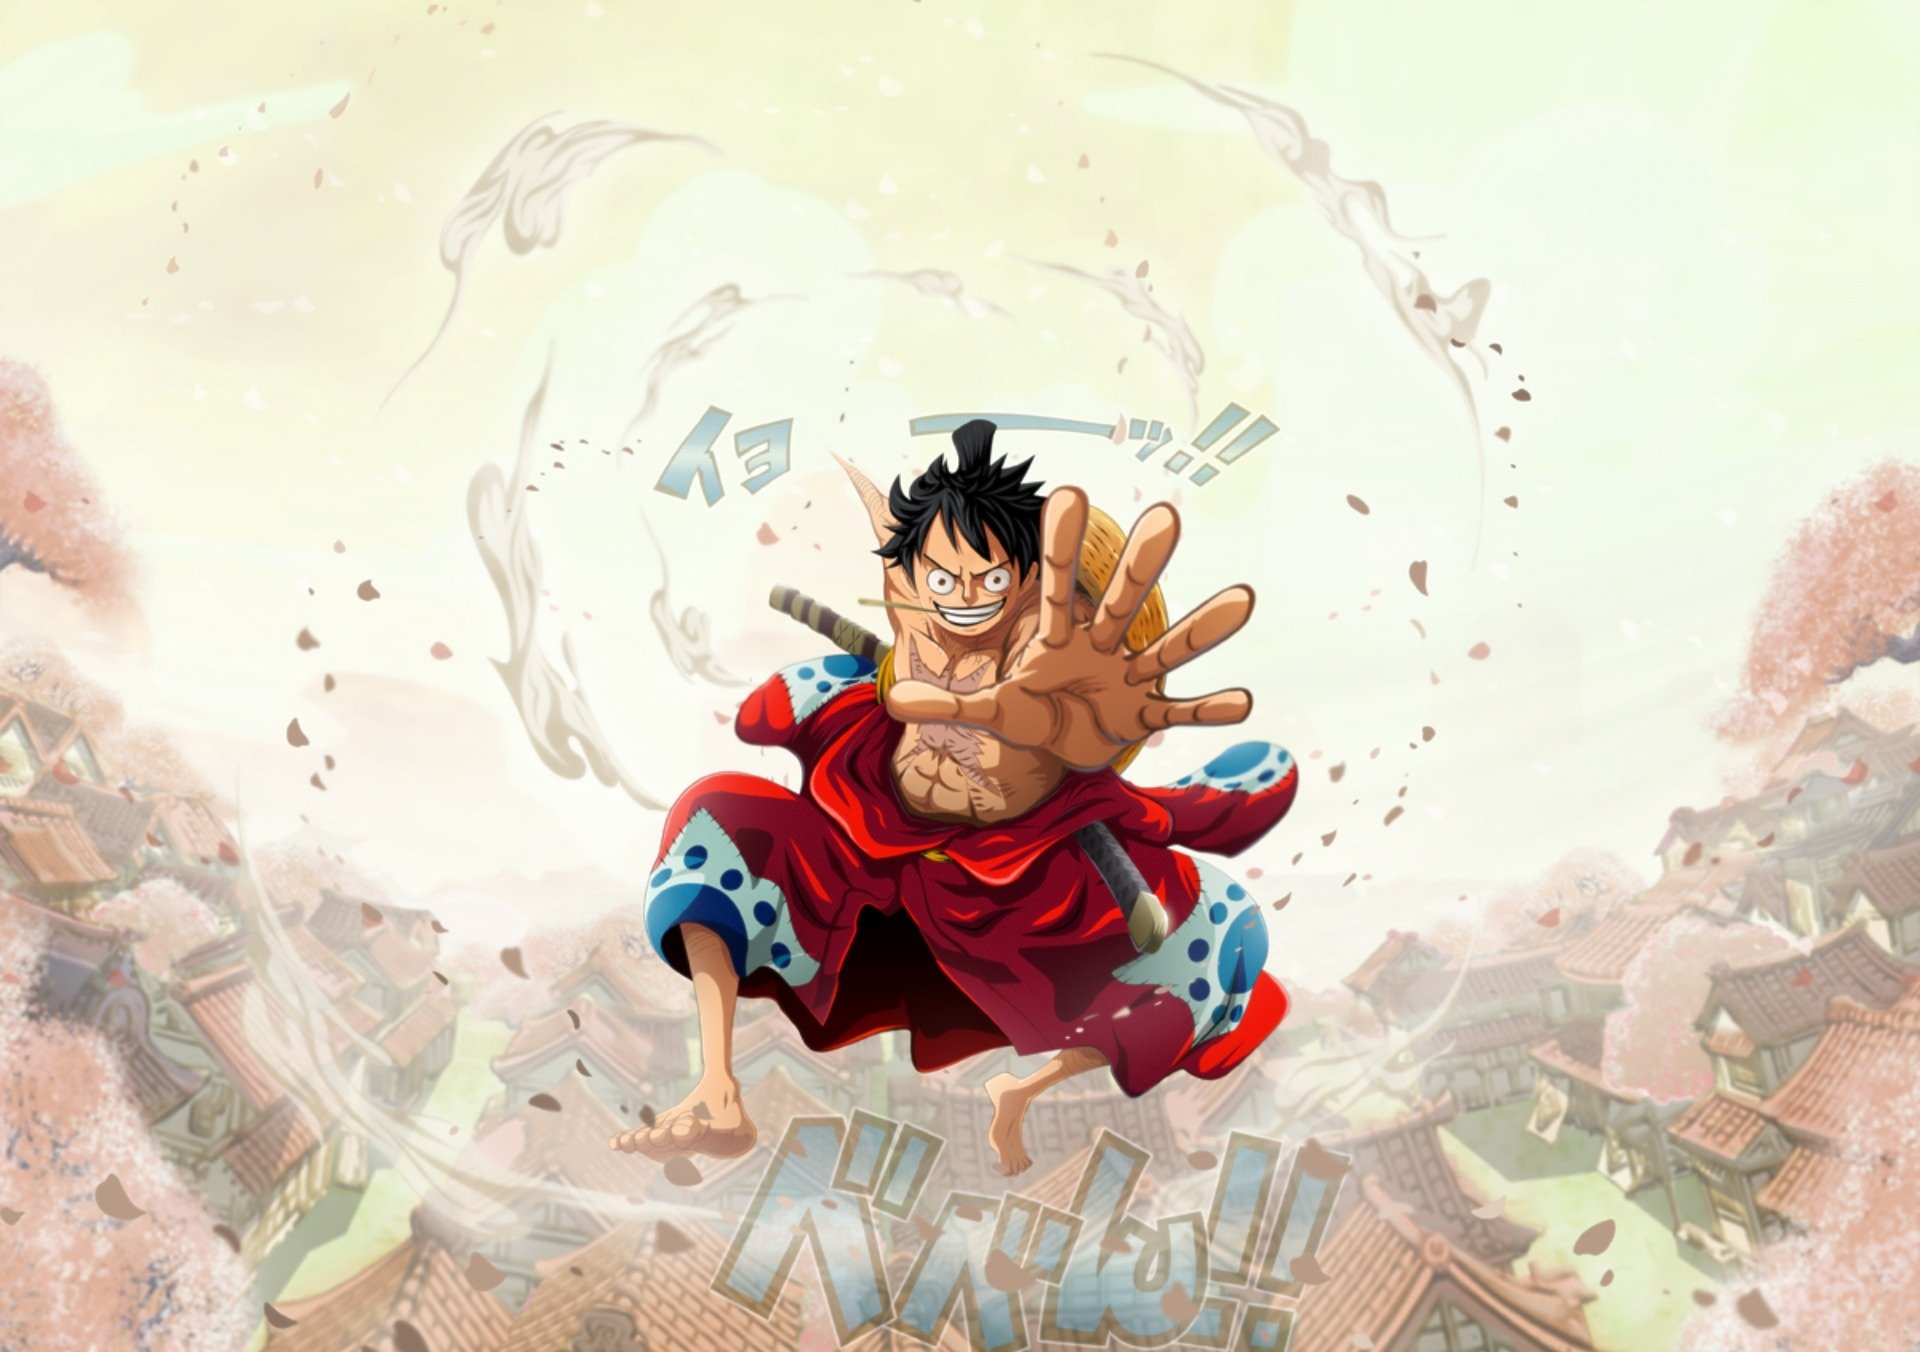 Wallpaper ID 433085  Anime One Piece Phone Wallpaper Monkey D Luffy  750x1334 free download